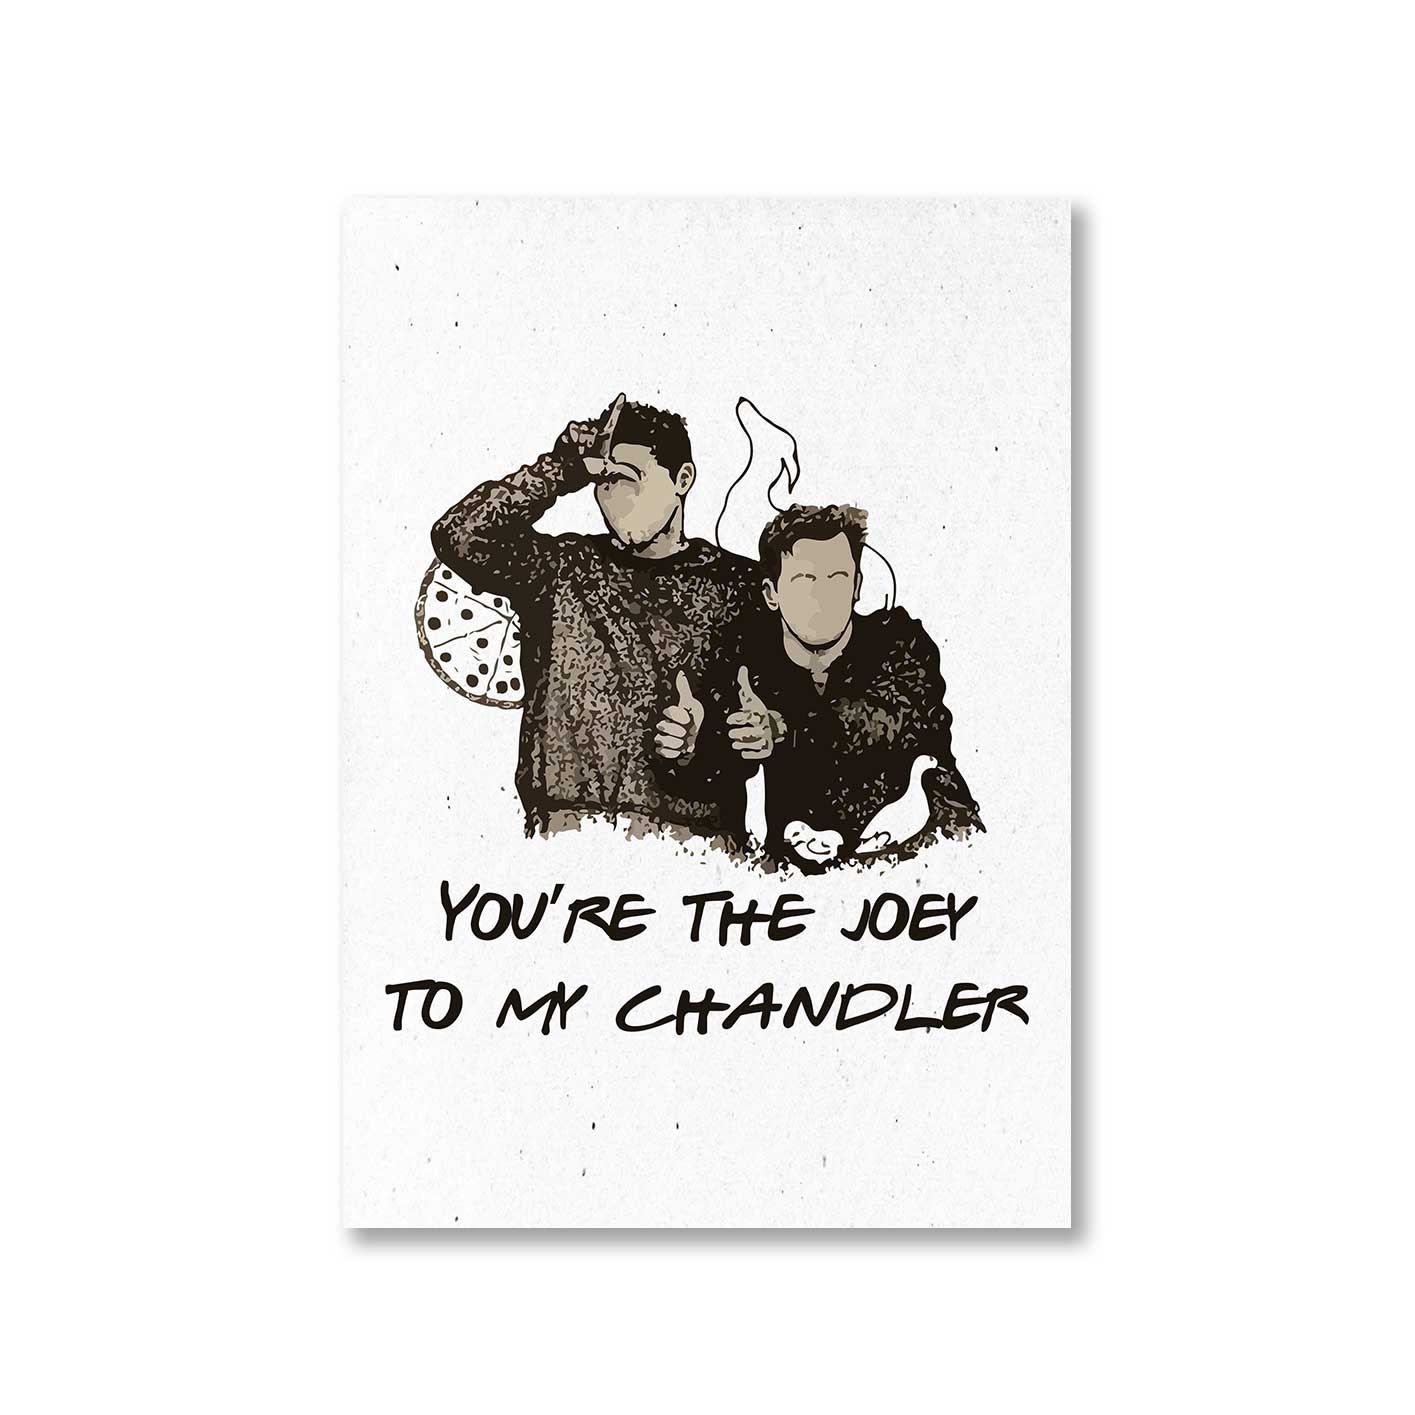 Friends Poster - Joey To My Chandler The Banyan Tee TBT